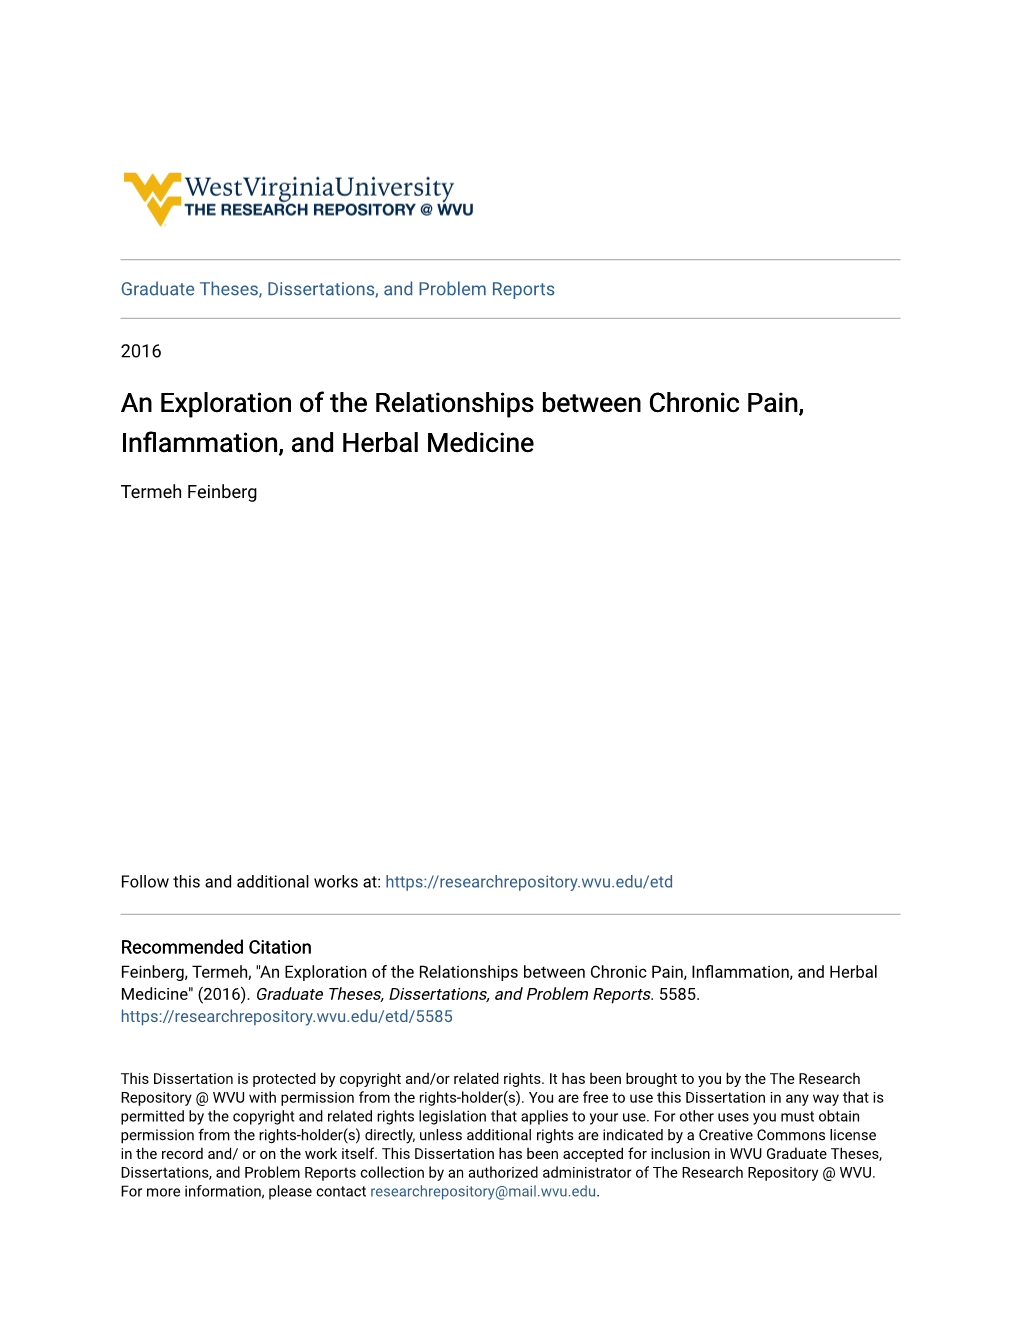 An Exploration of the Relationships Between Chronic Pain, Inflammation, and Herbal Medicine